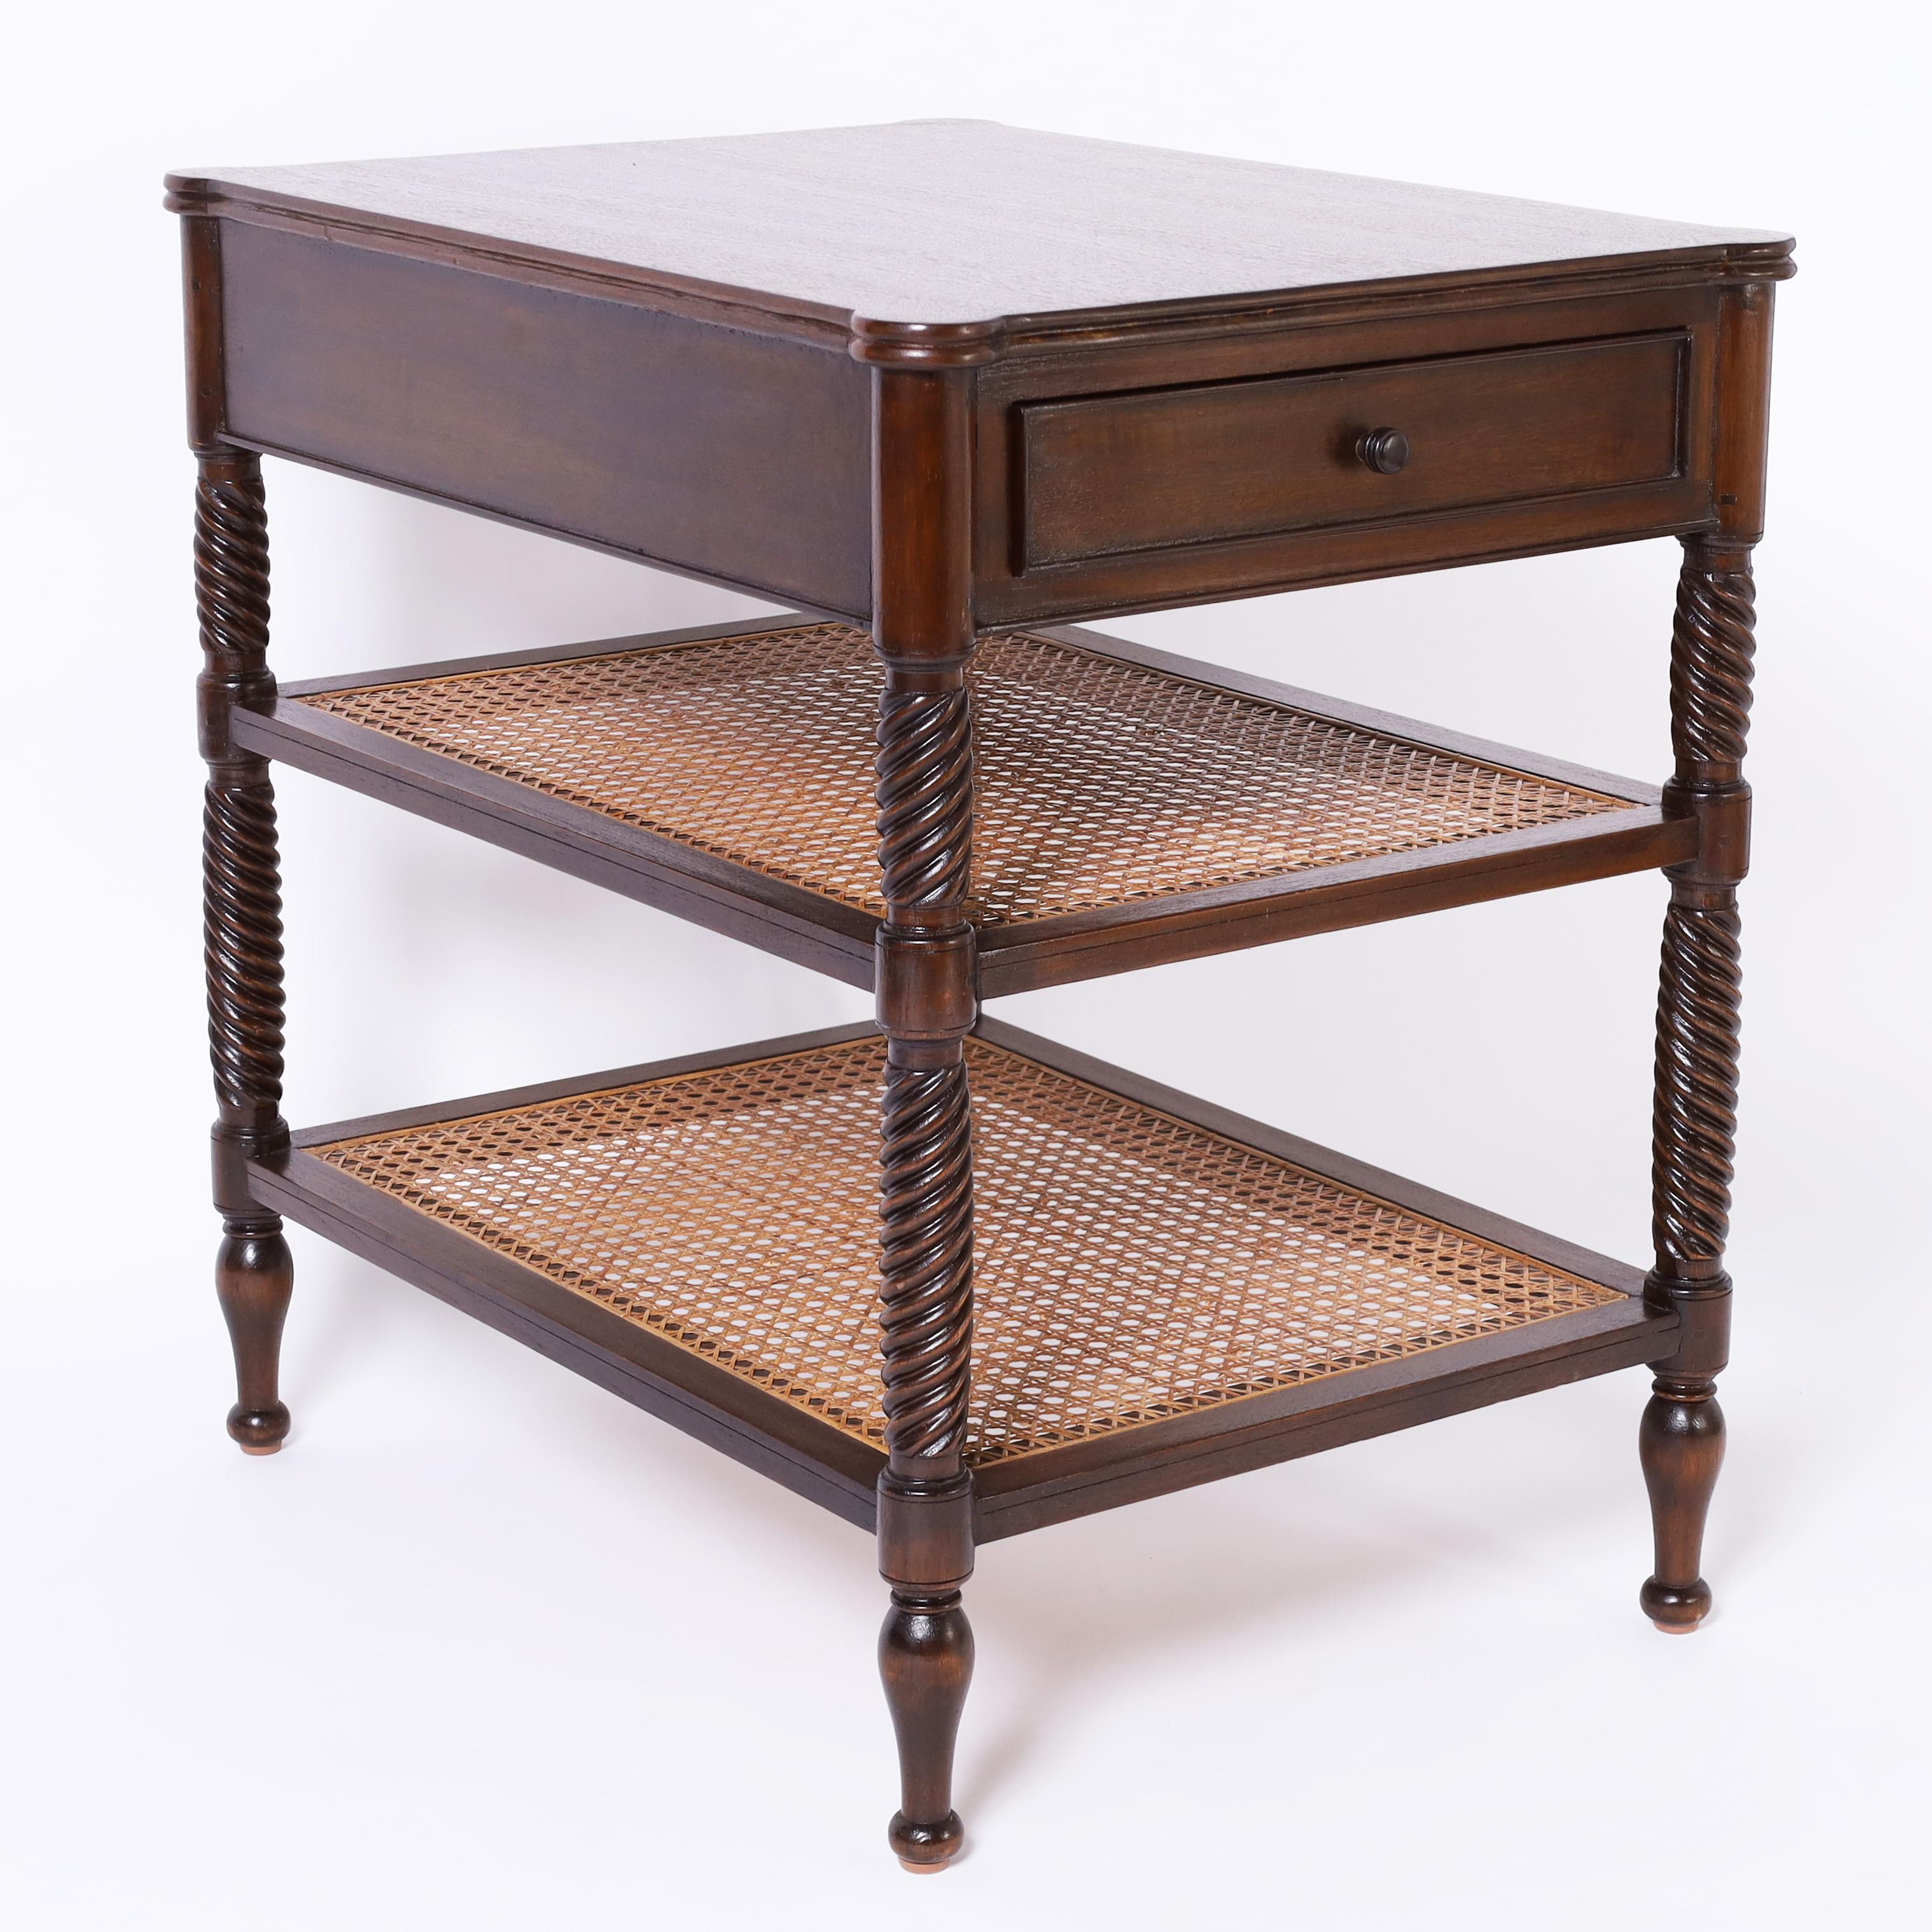 British Colonial Style Three Tiered Caned Stand or Table (Britisch Kolonial) im Angebot